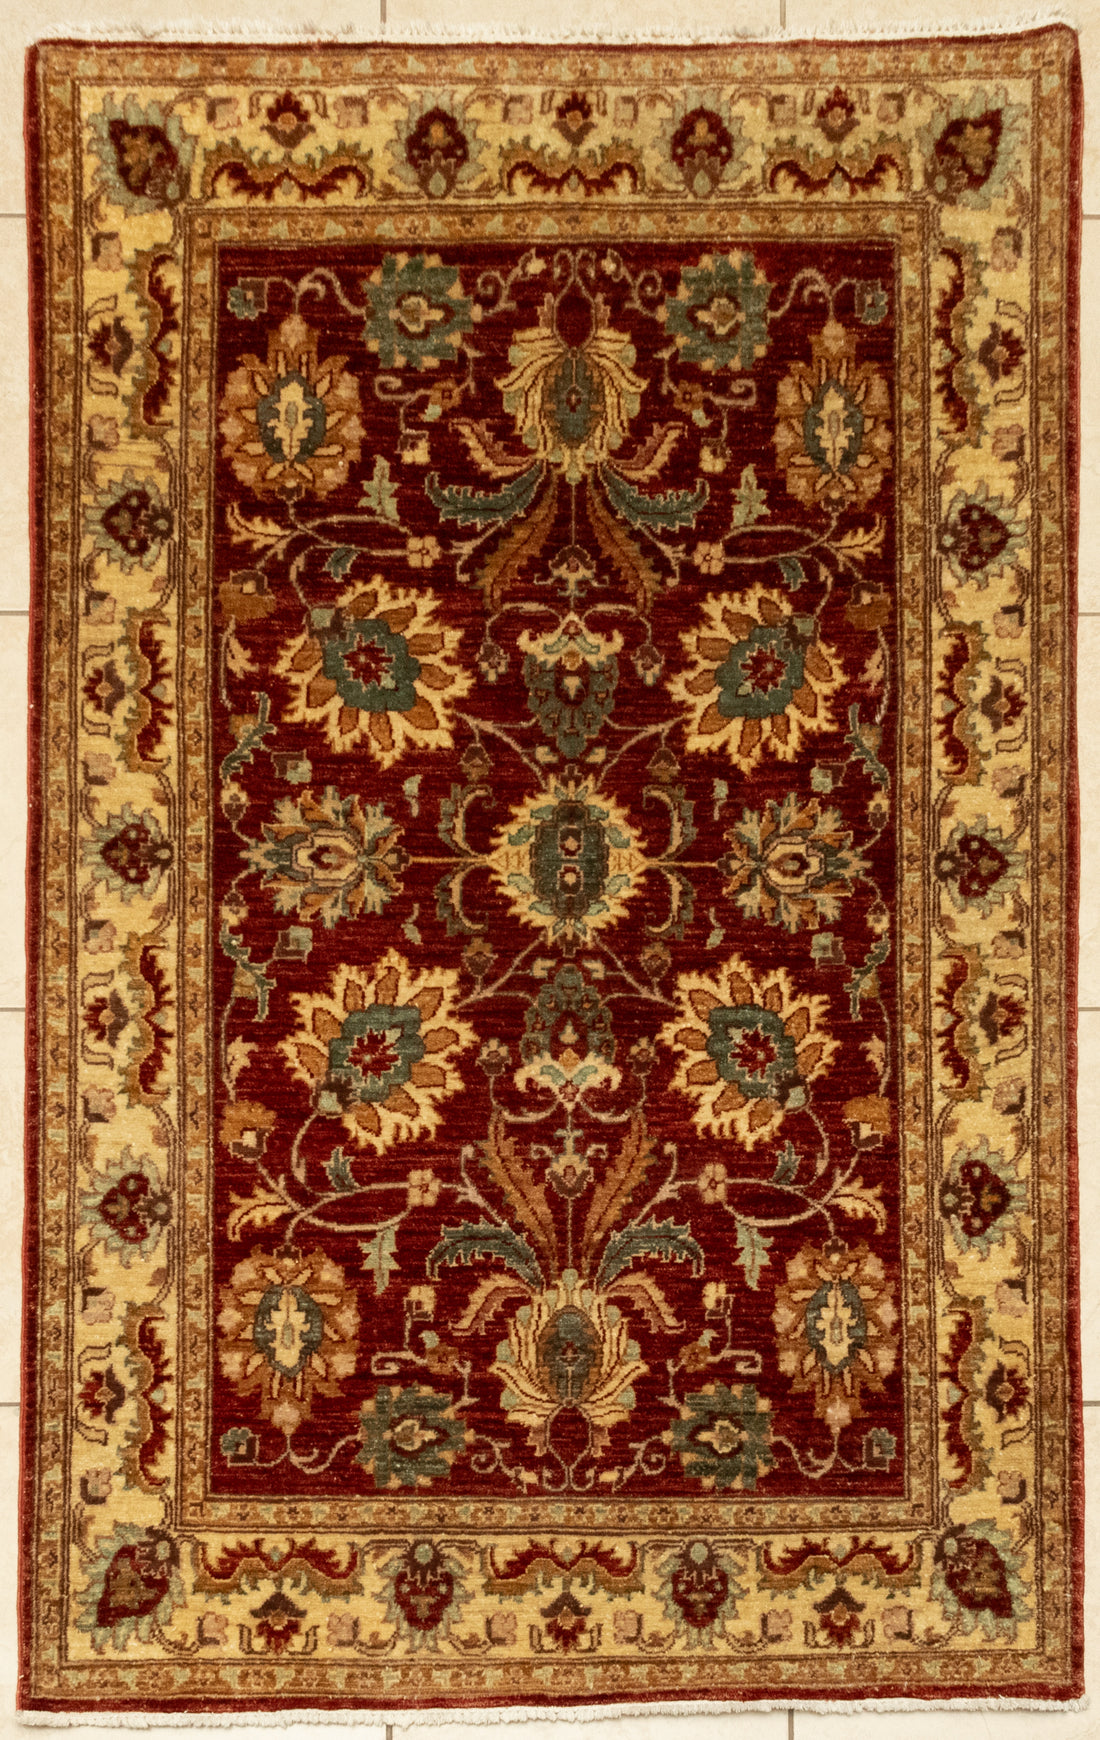 FABERCE Hand-Knotted Wool Rug 6'3" x 3'11"